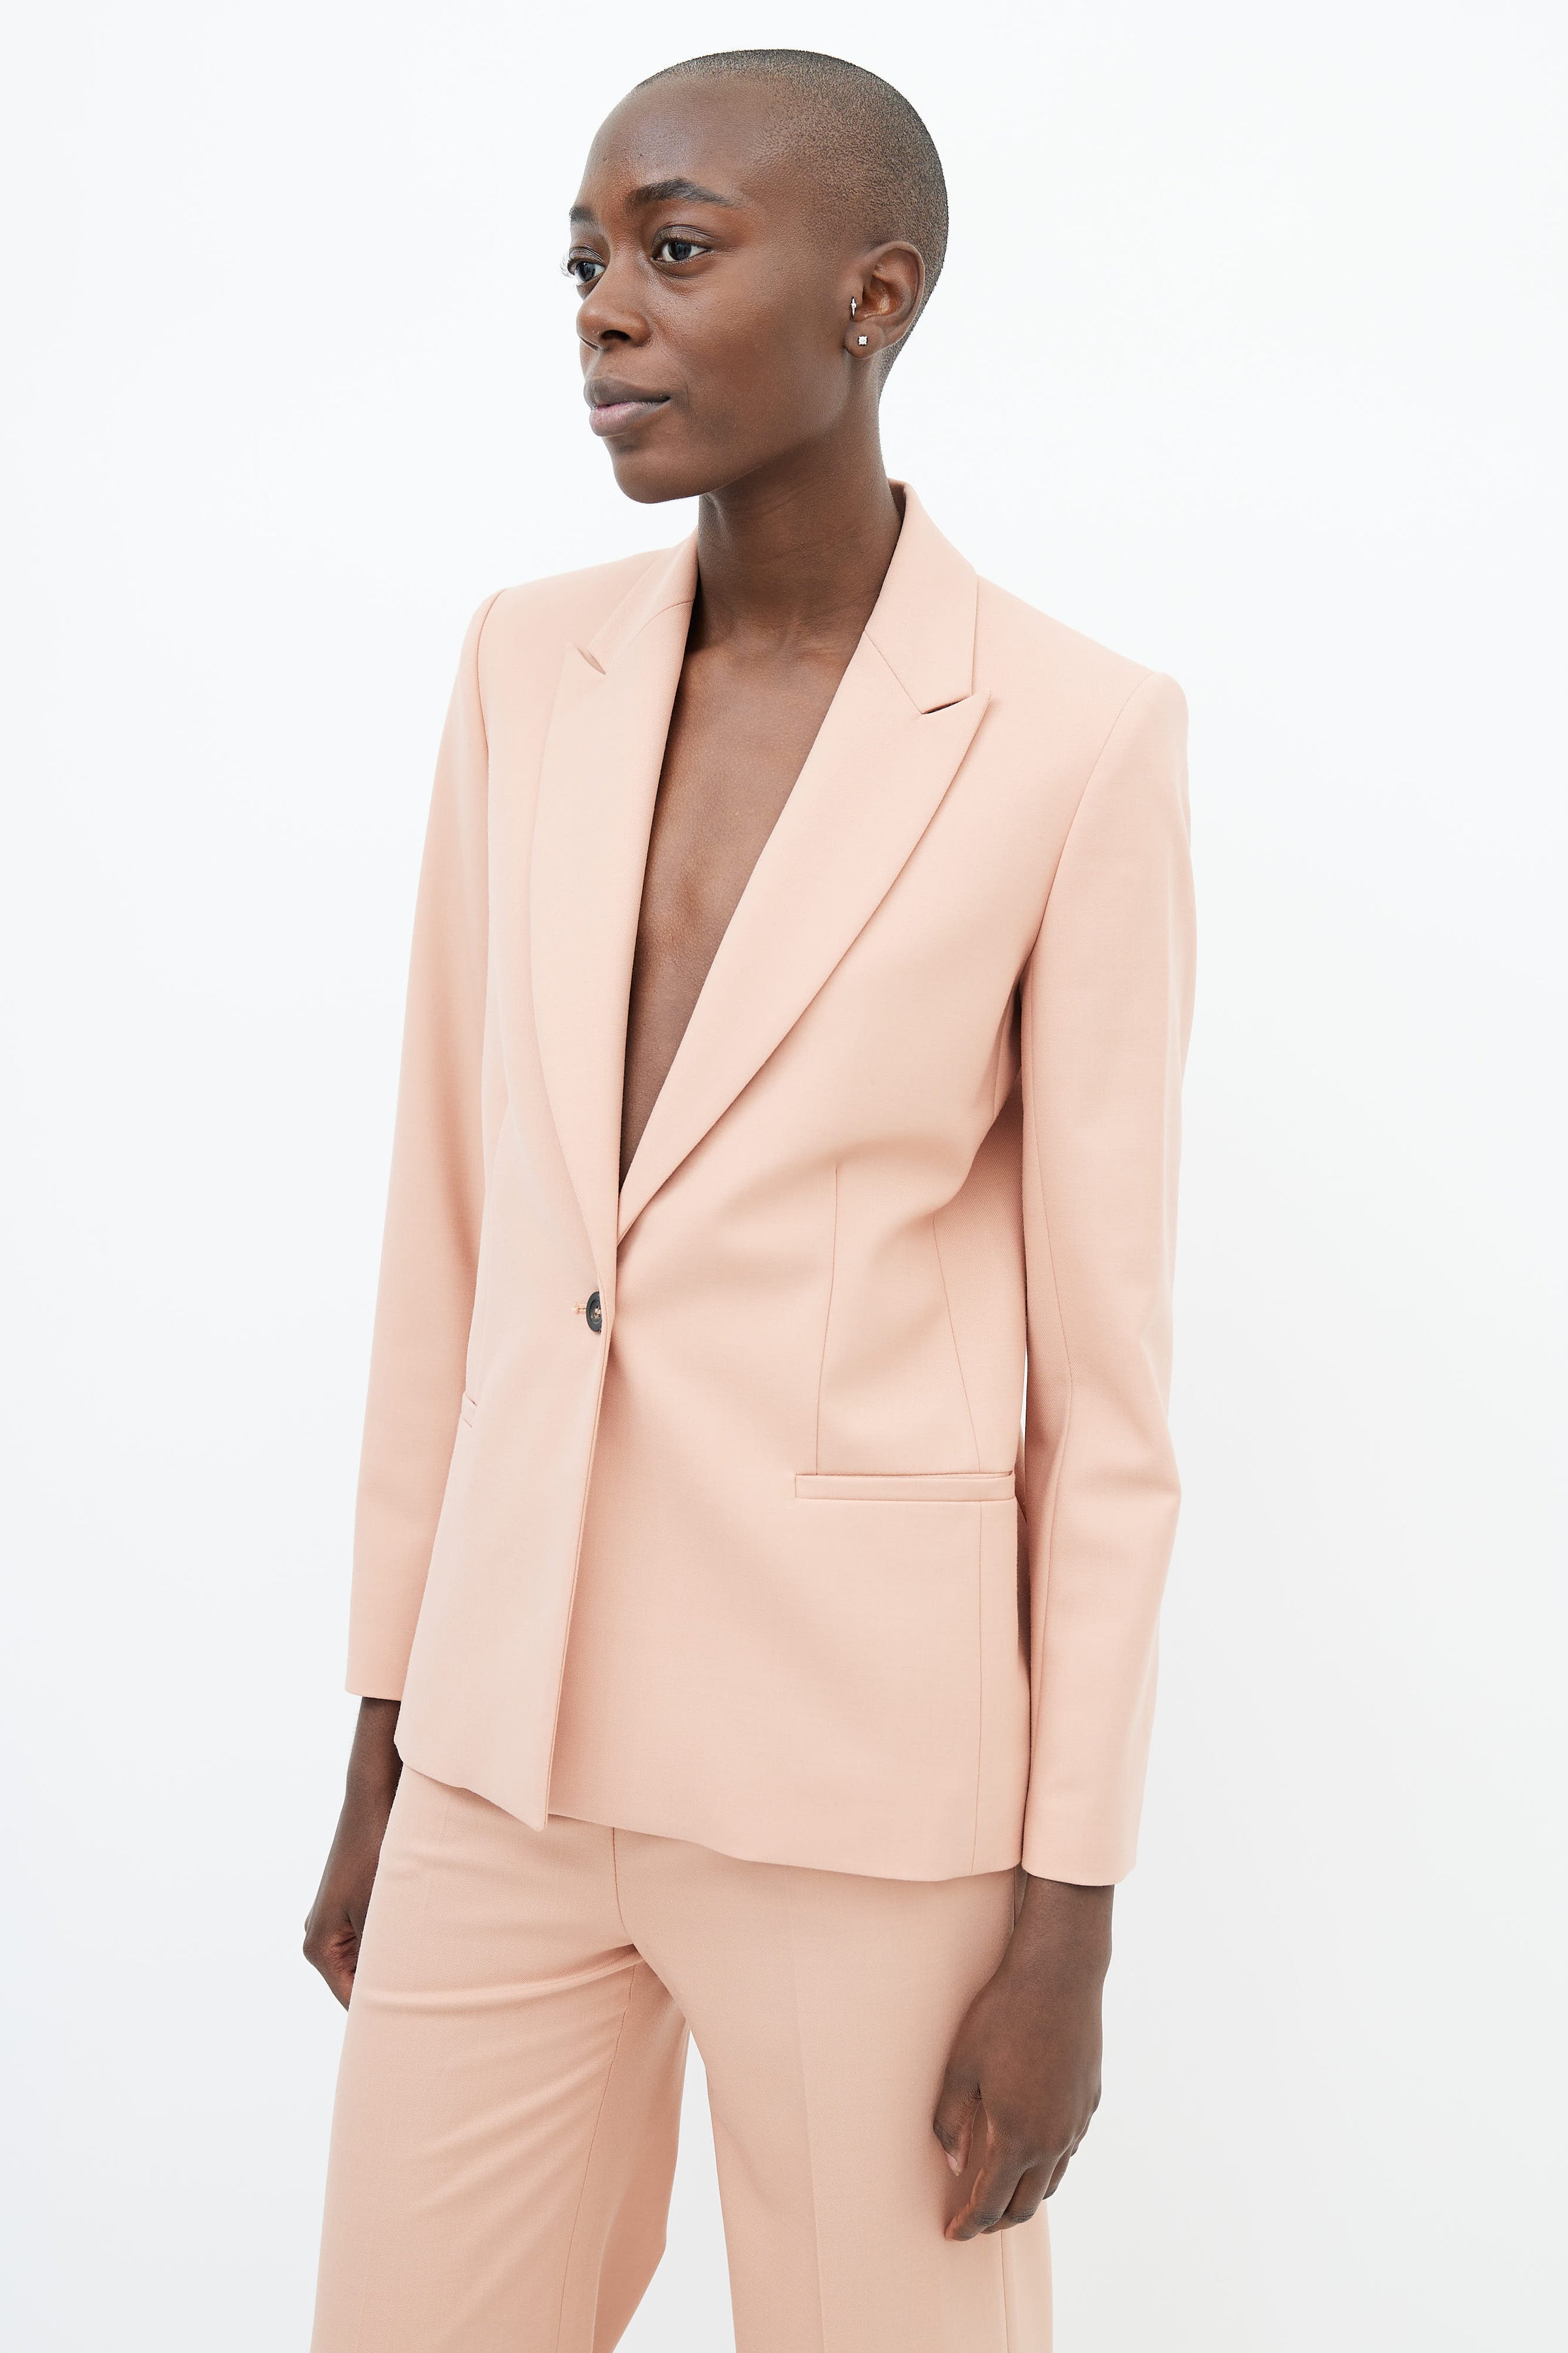 Boohoo Plunge Fitted Blazer  Flared Pants Suit in Pink  Lyst UK